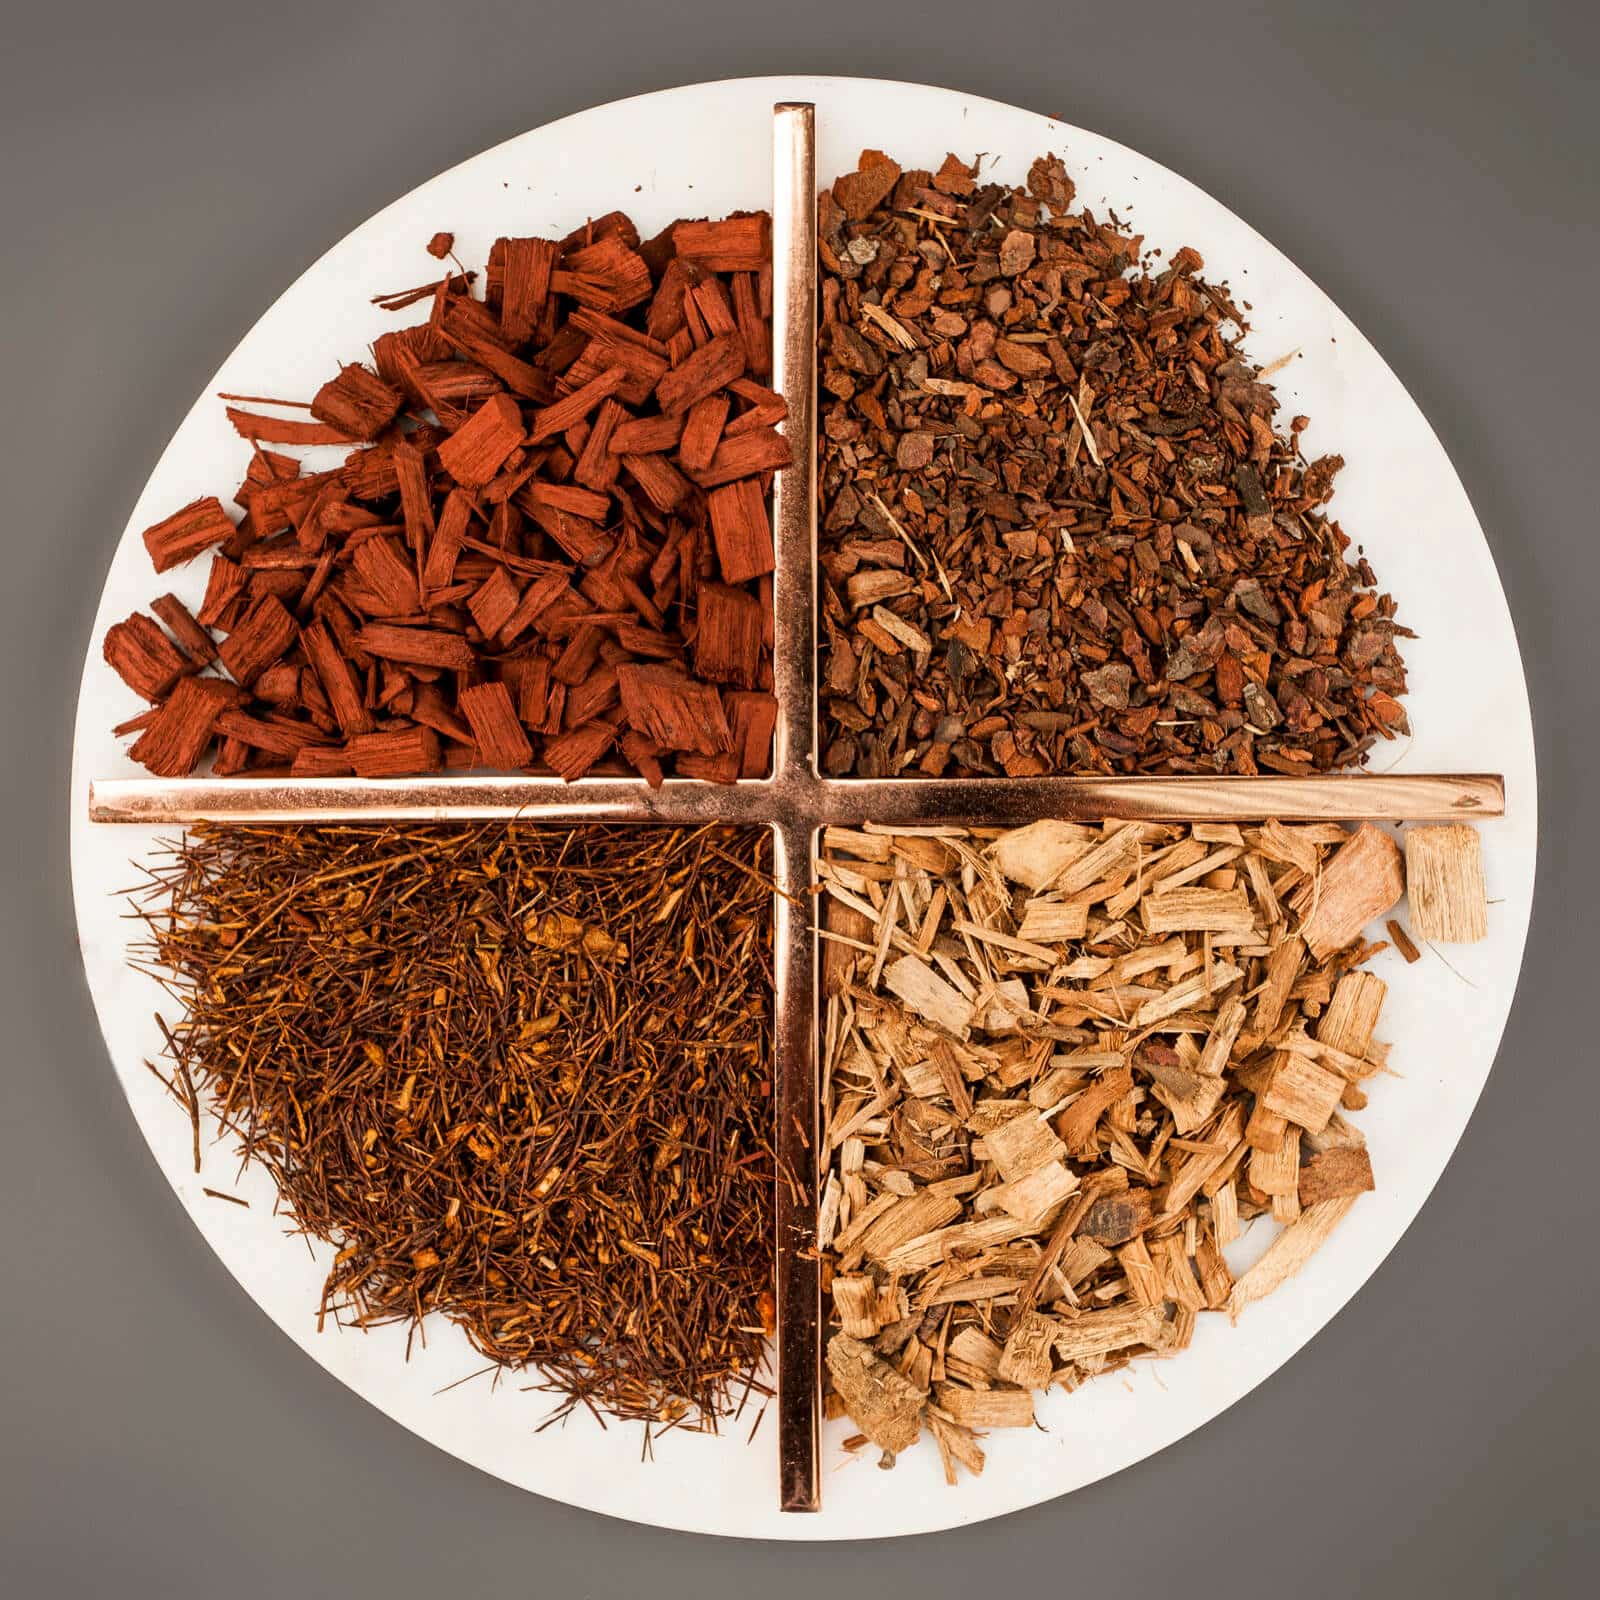 Four distinct piles of wood chips of varying shades on a circular white plate.